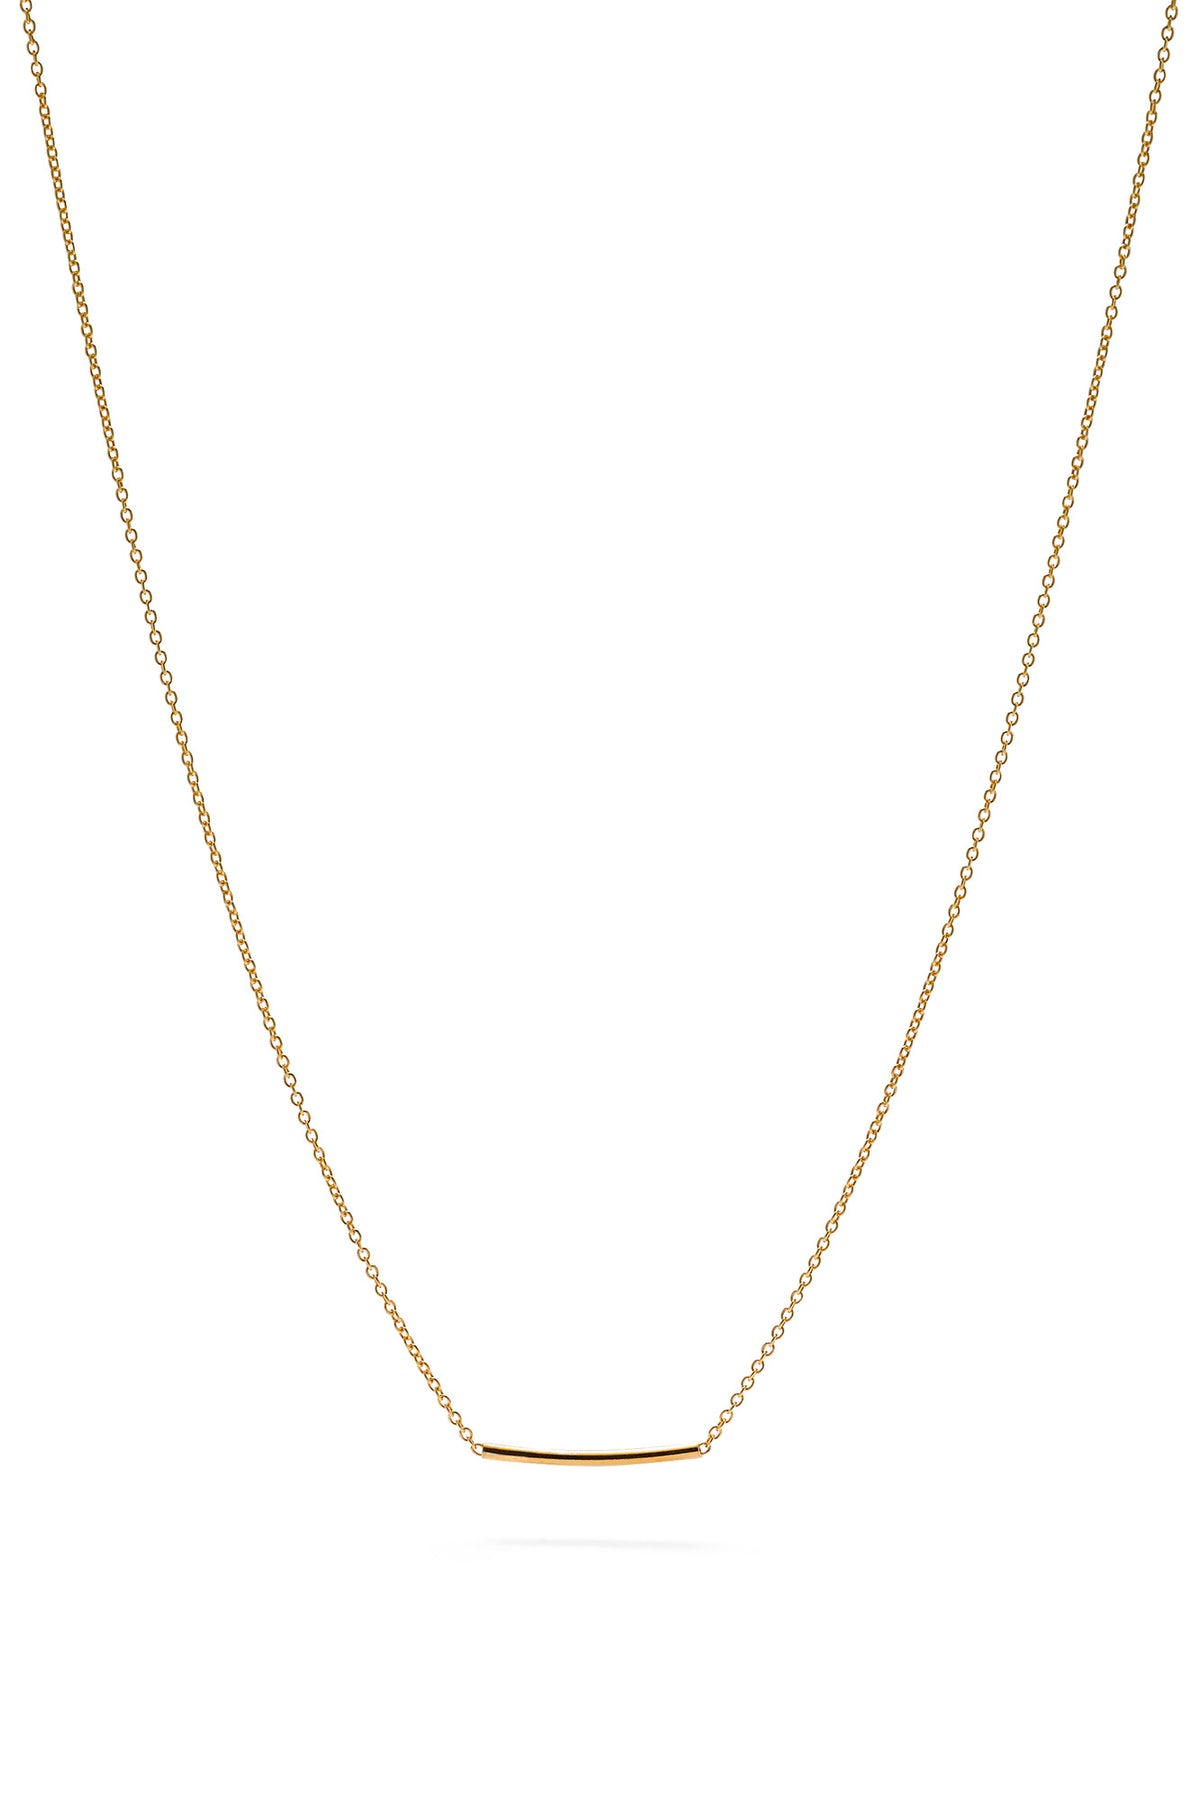 Necklaces | Jewelry that lasts for more than one season | Shop here ...